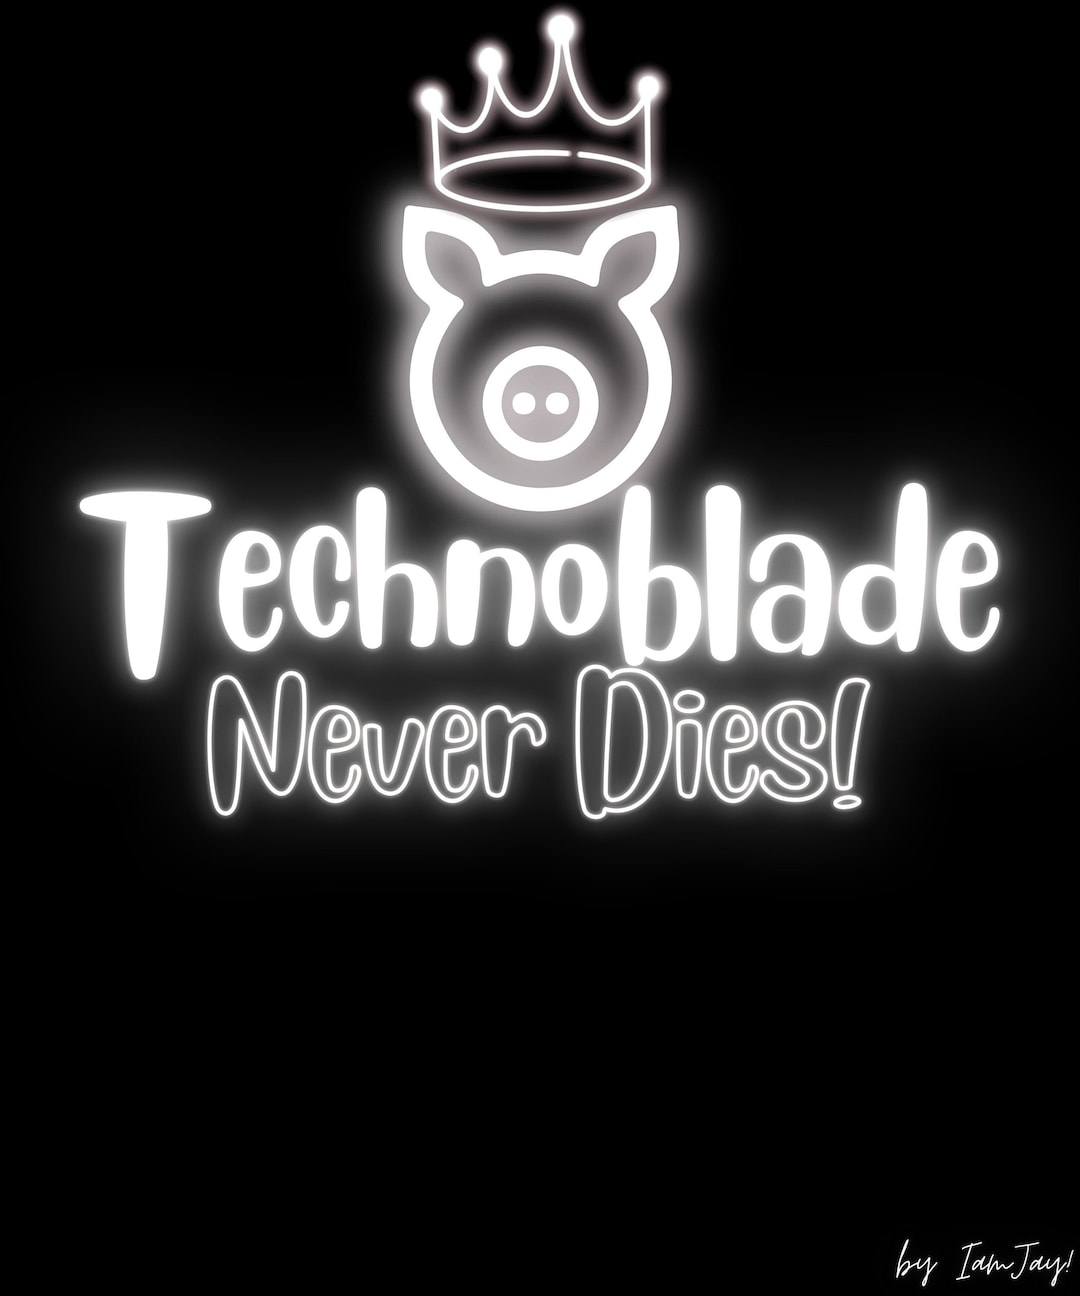 Technoblade With Glass And Crown HD Technoblade Wallpapers